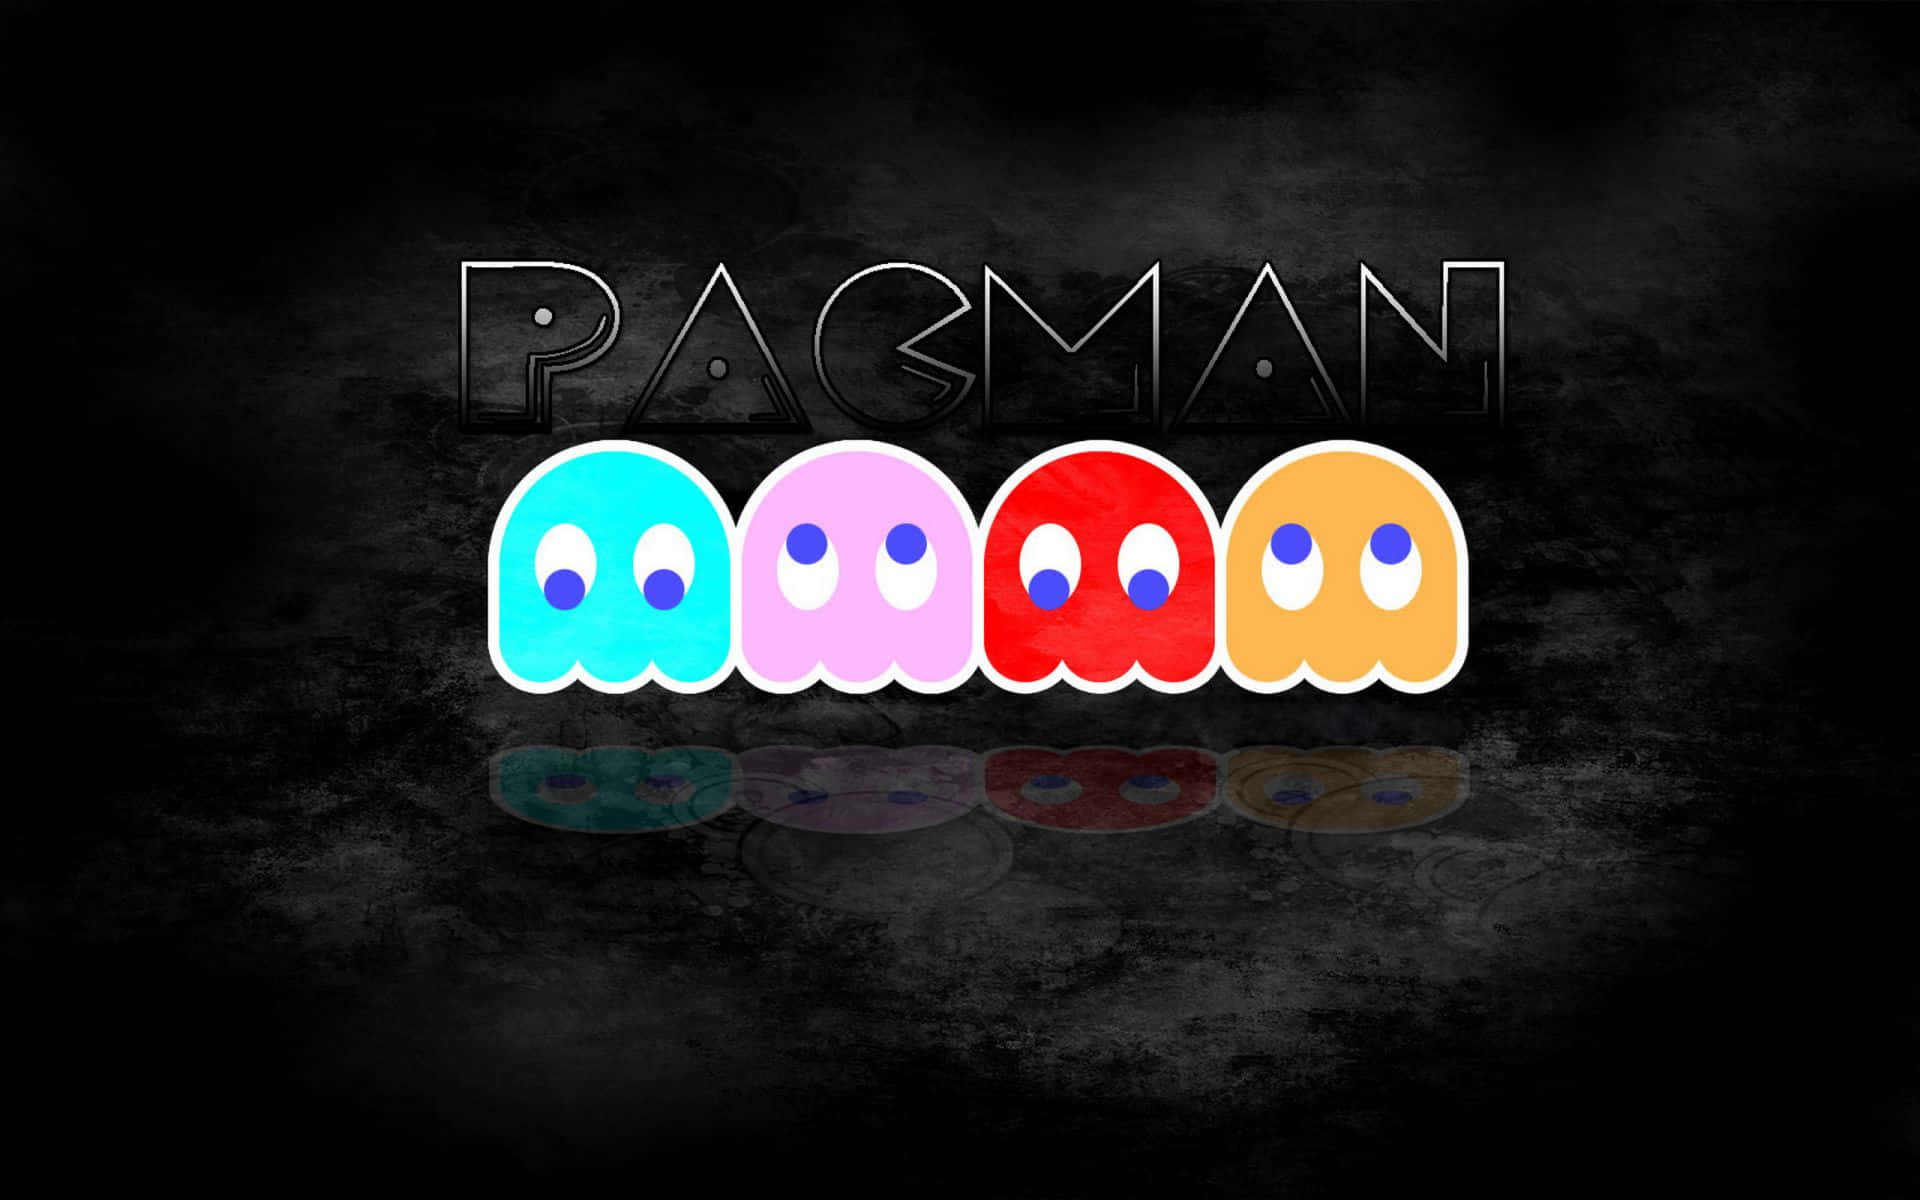 Enjoy the classics with this HD Pacman wallpaper Wallpaper